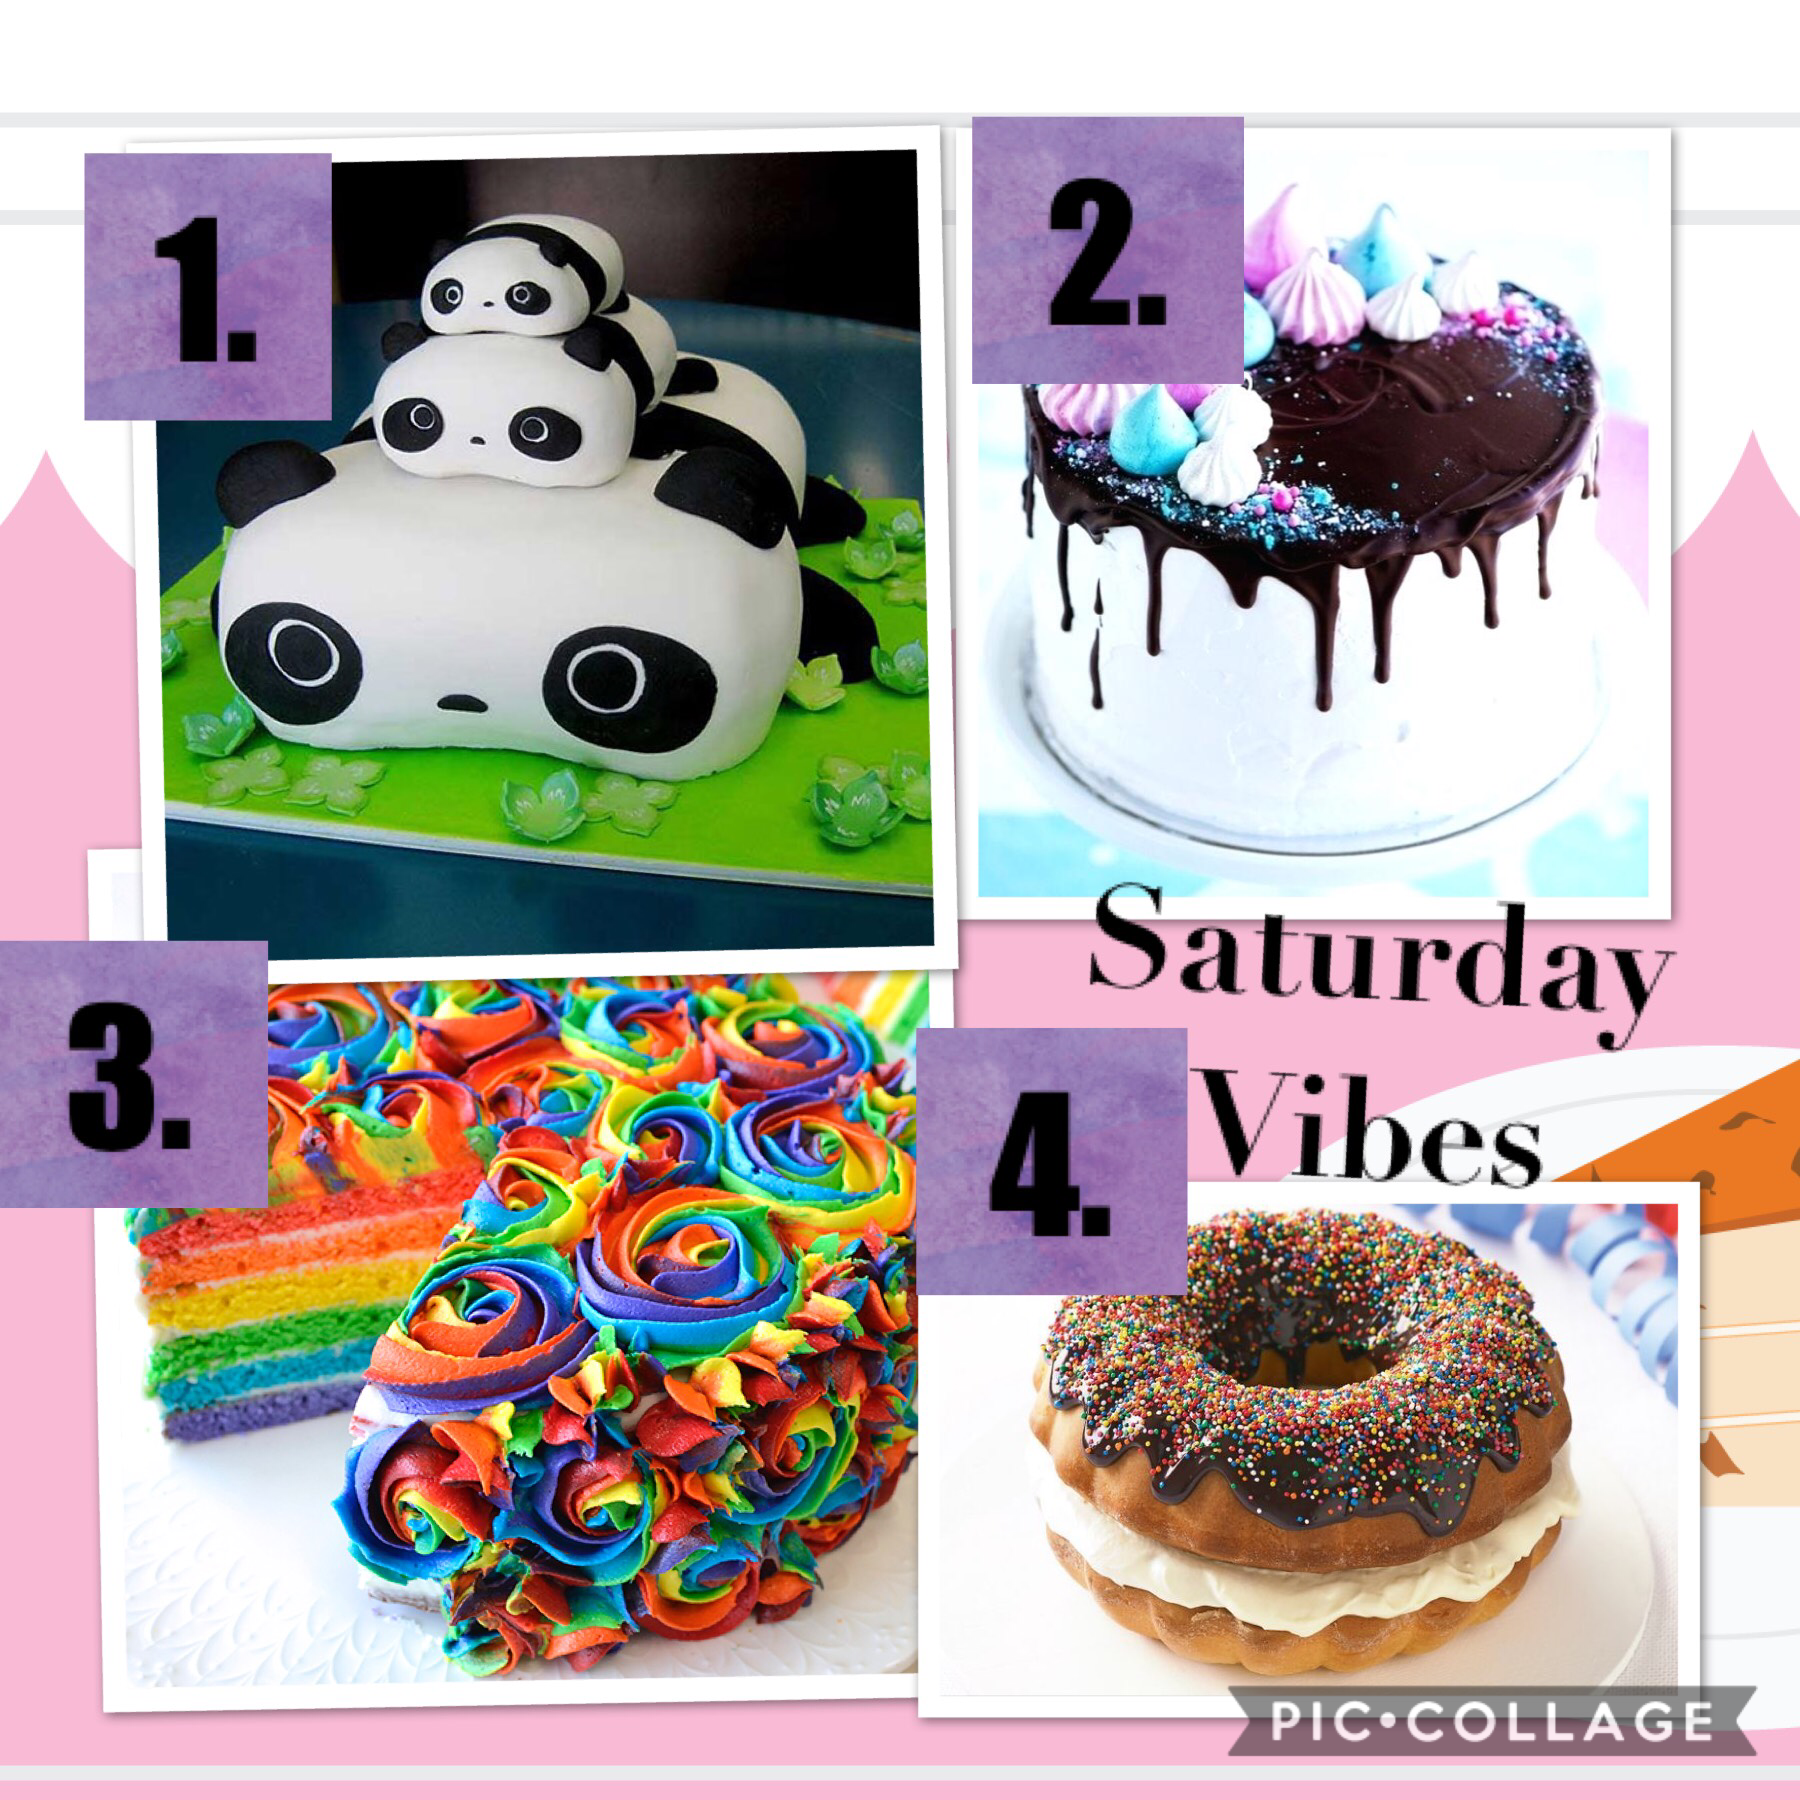 Comment which cake is your fave !!